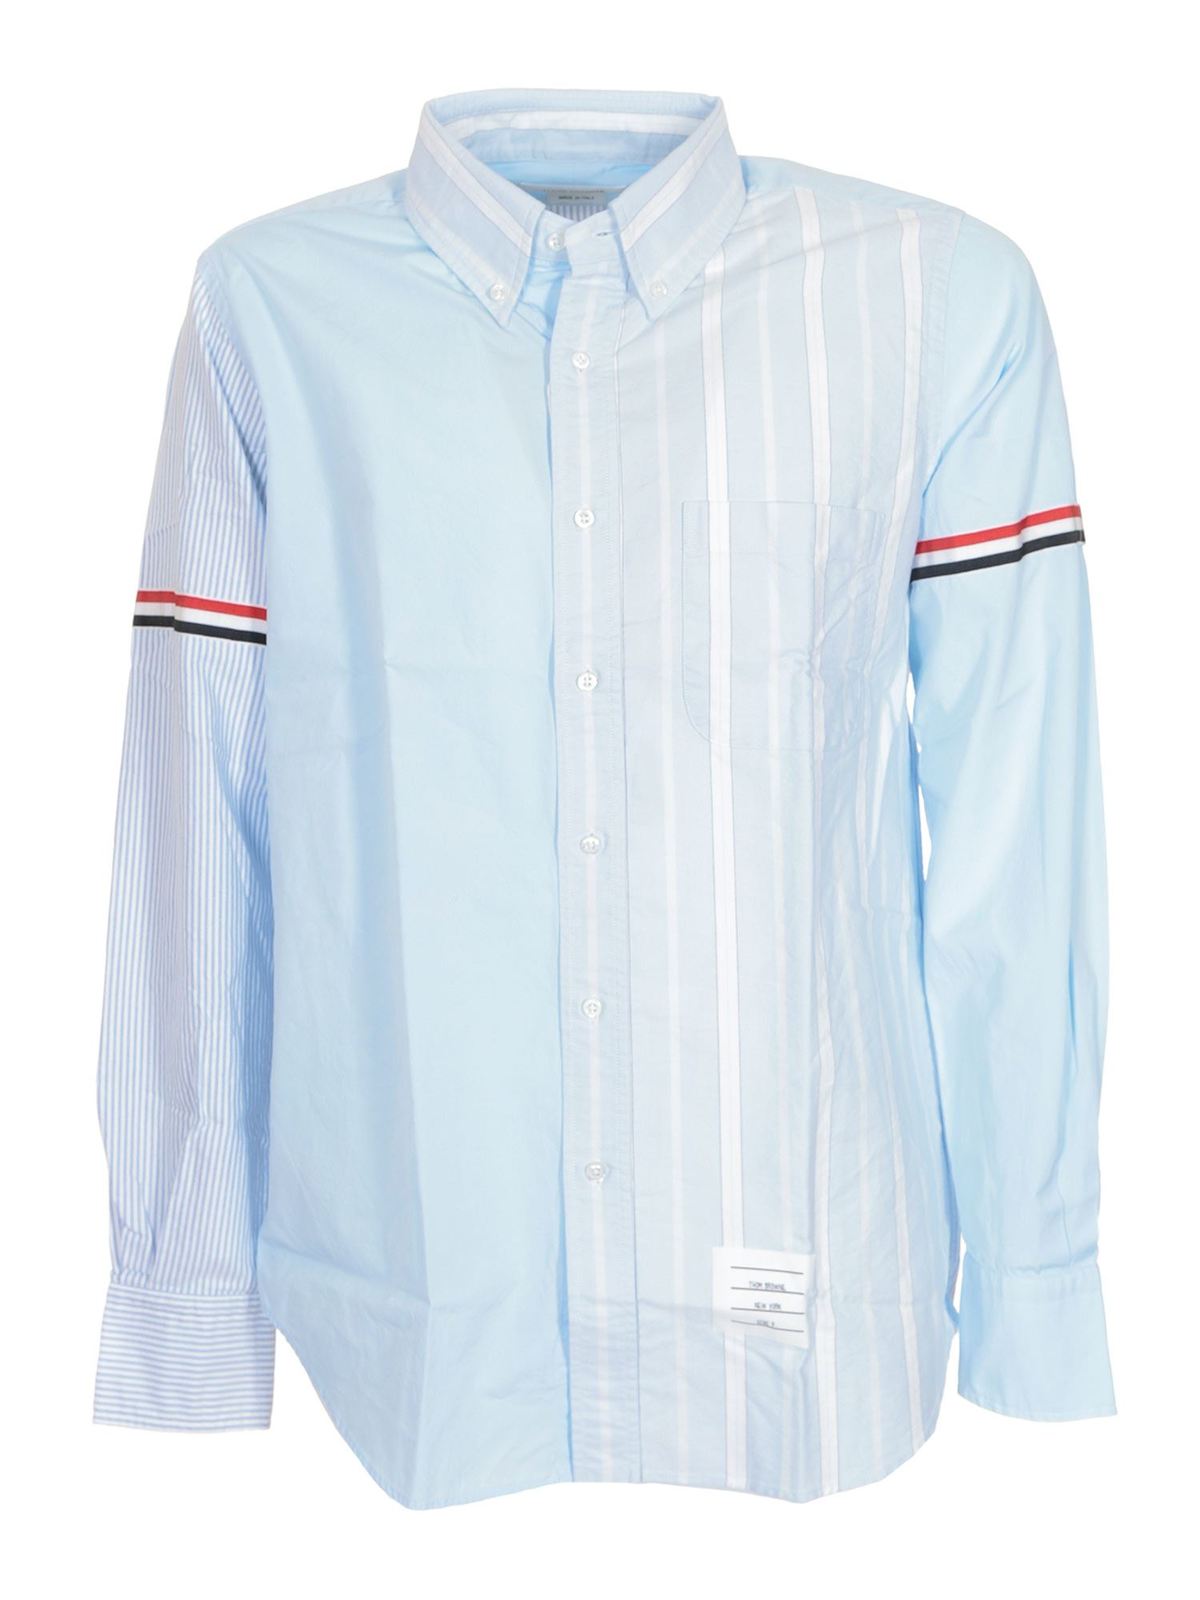 THOM BROWNE ARMBAND SHIRT IN LIGHT BLUE